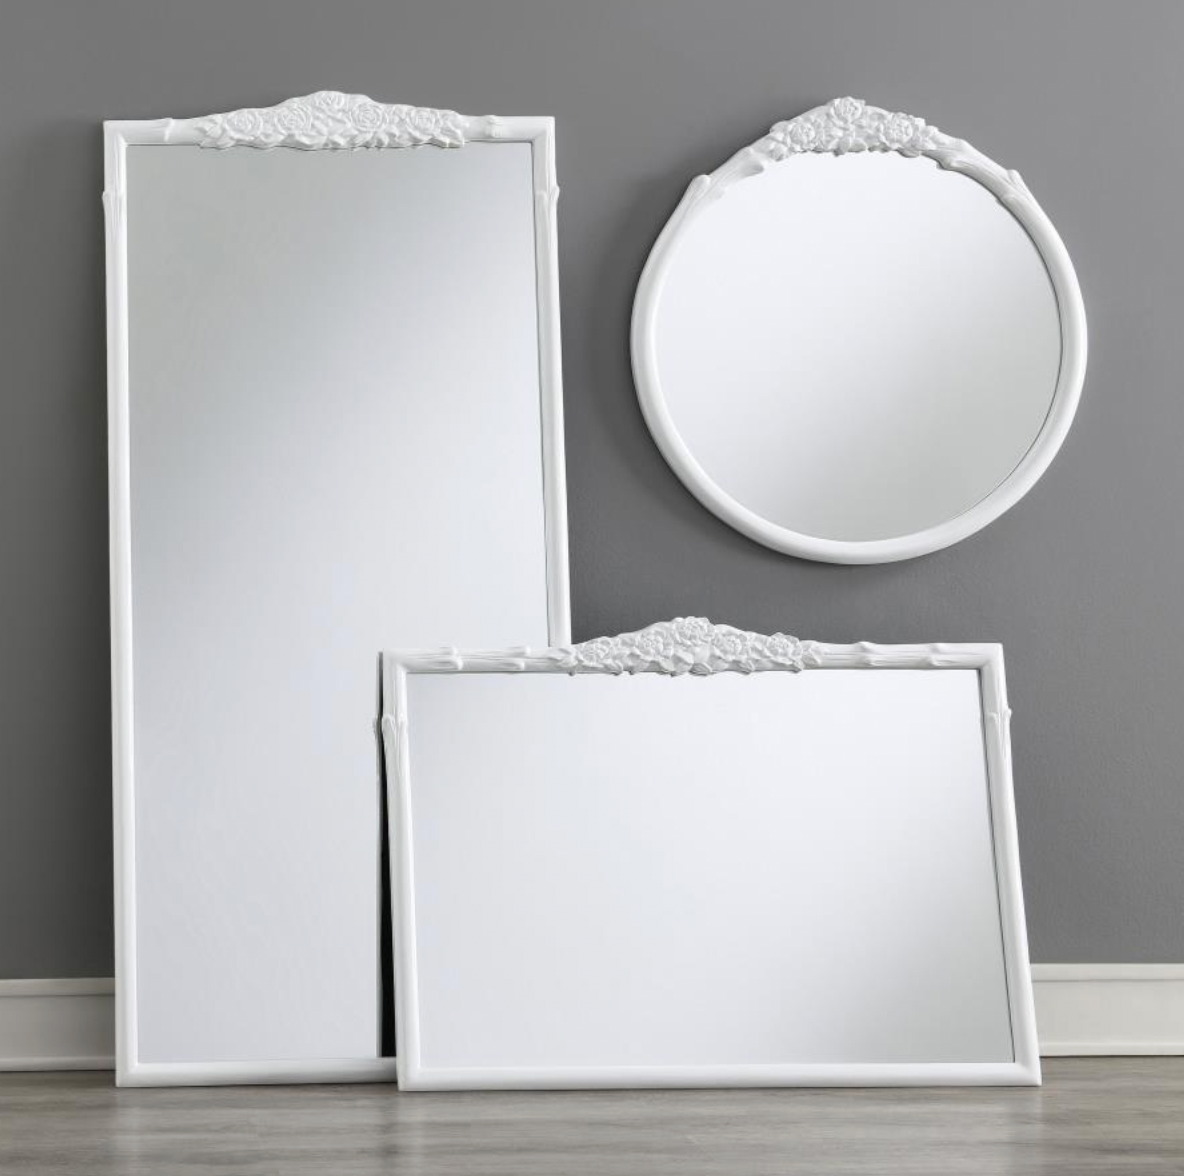 SLYVIE French Provincial Round Wall Mirror White